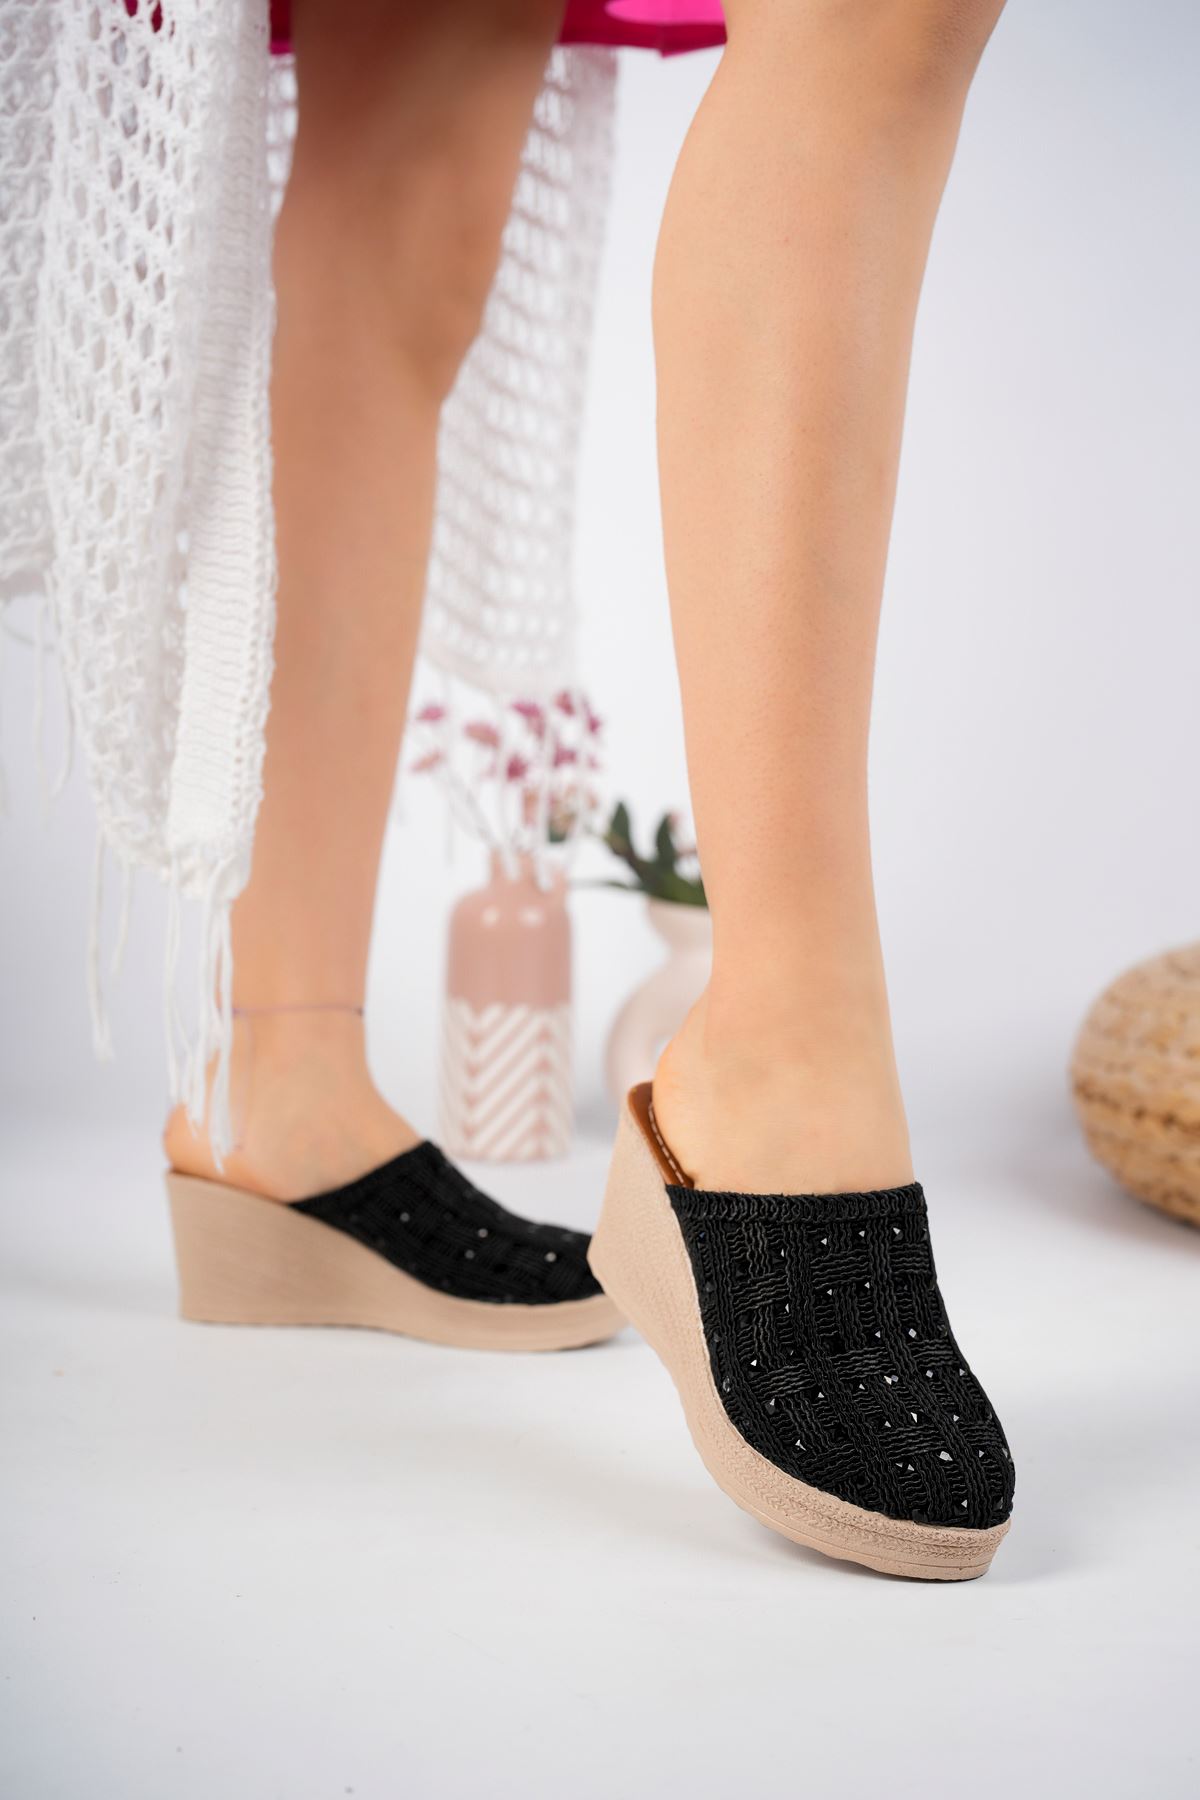 Padded Insole Plaid Knit Front Closed Stone Black Slippers